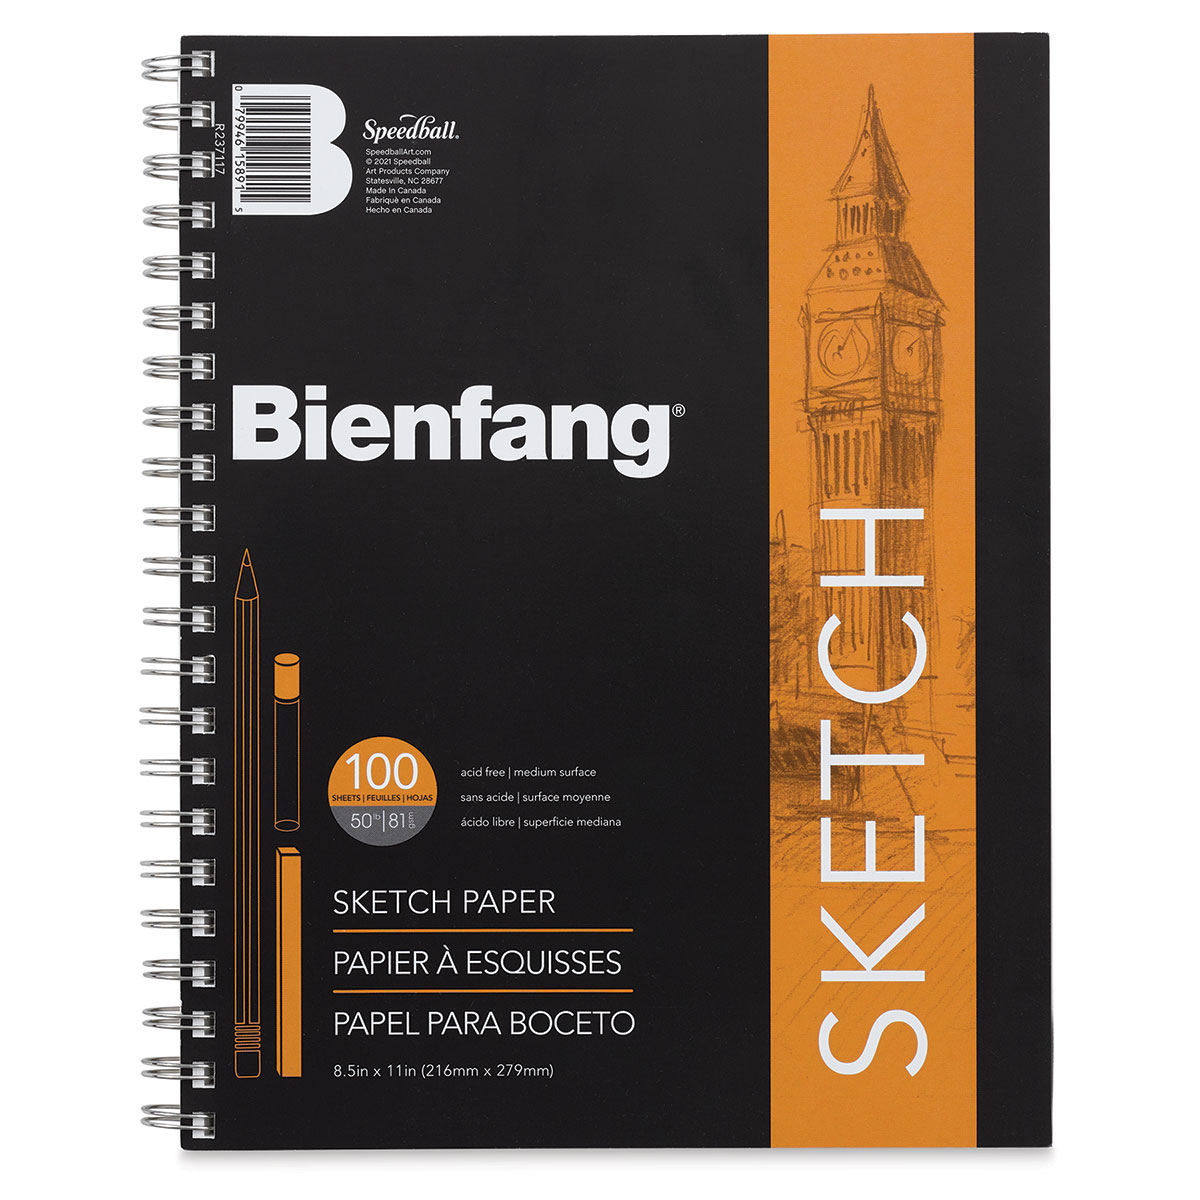 Sketch Pads and Sets 10% off for 2 or more 